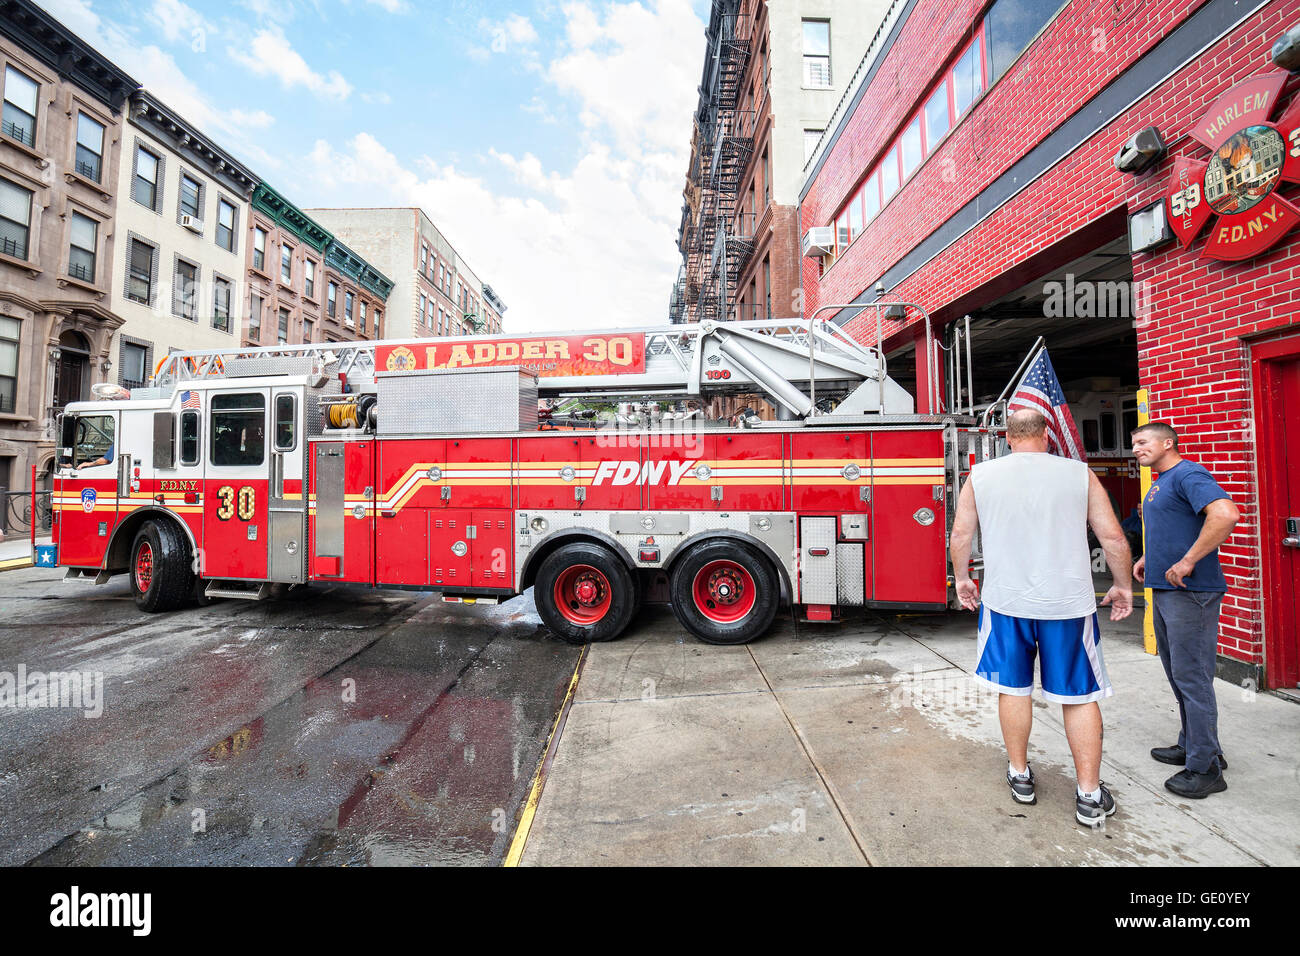 FDNY fire truck backs into garage in New York City Harlem district. Stock Photo